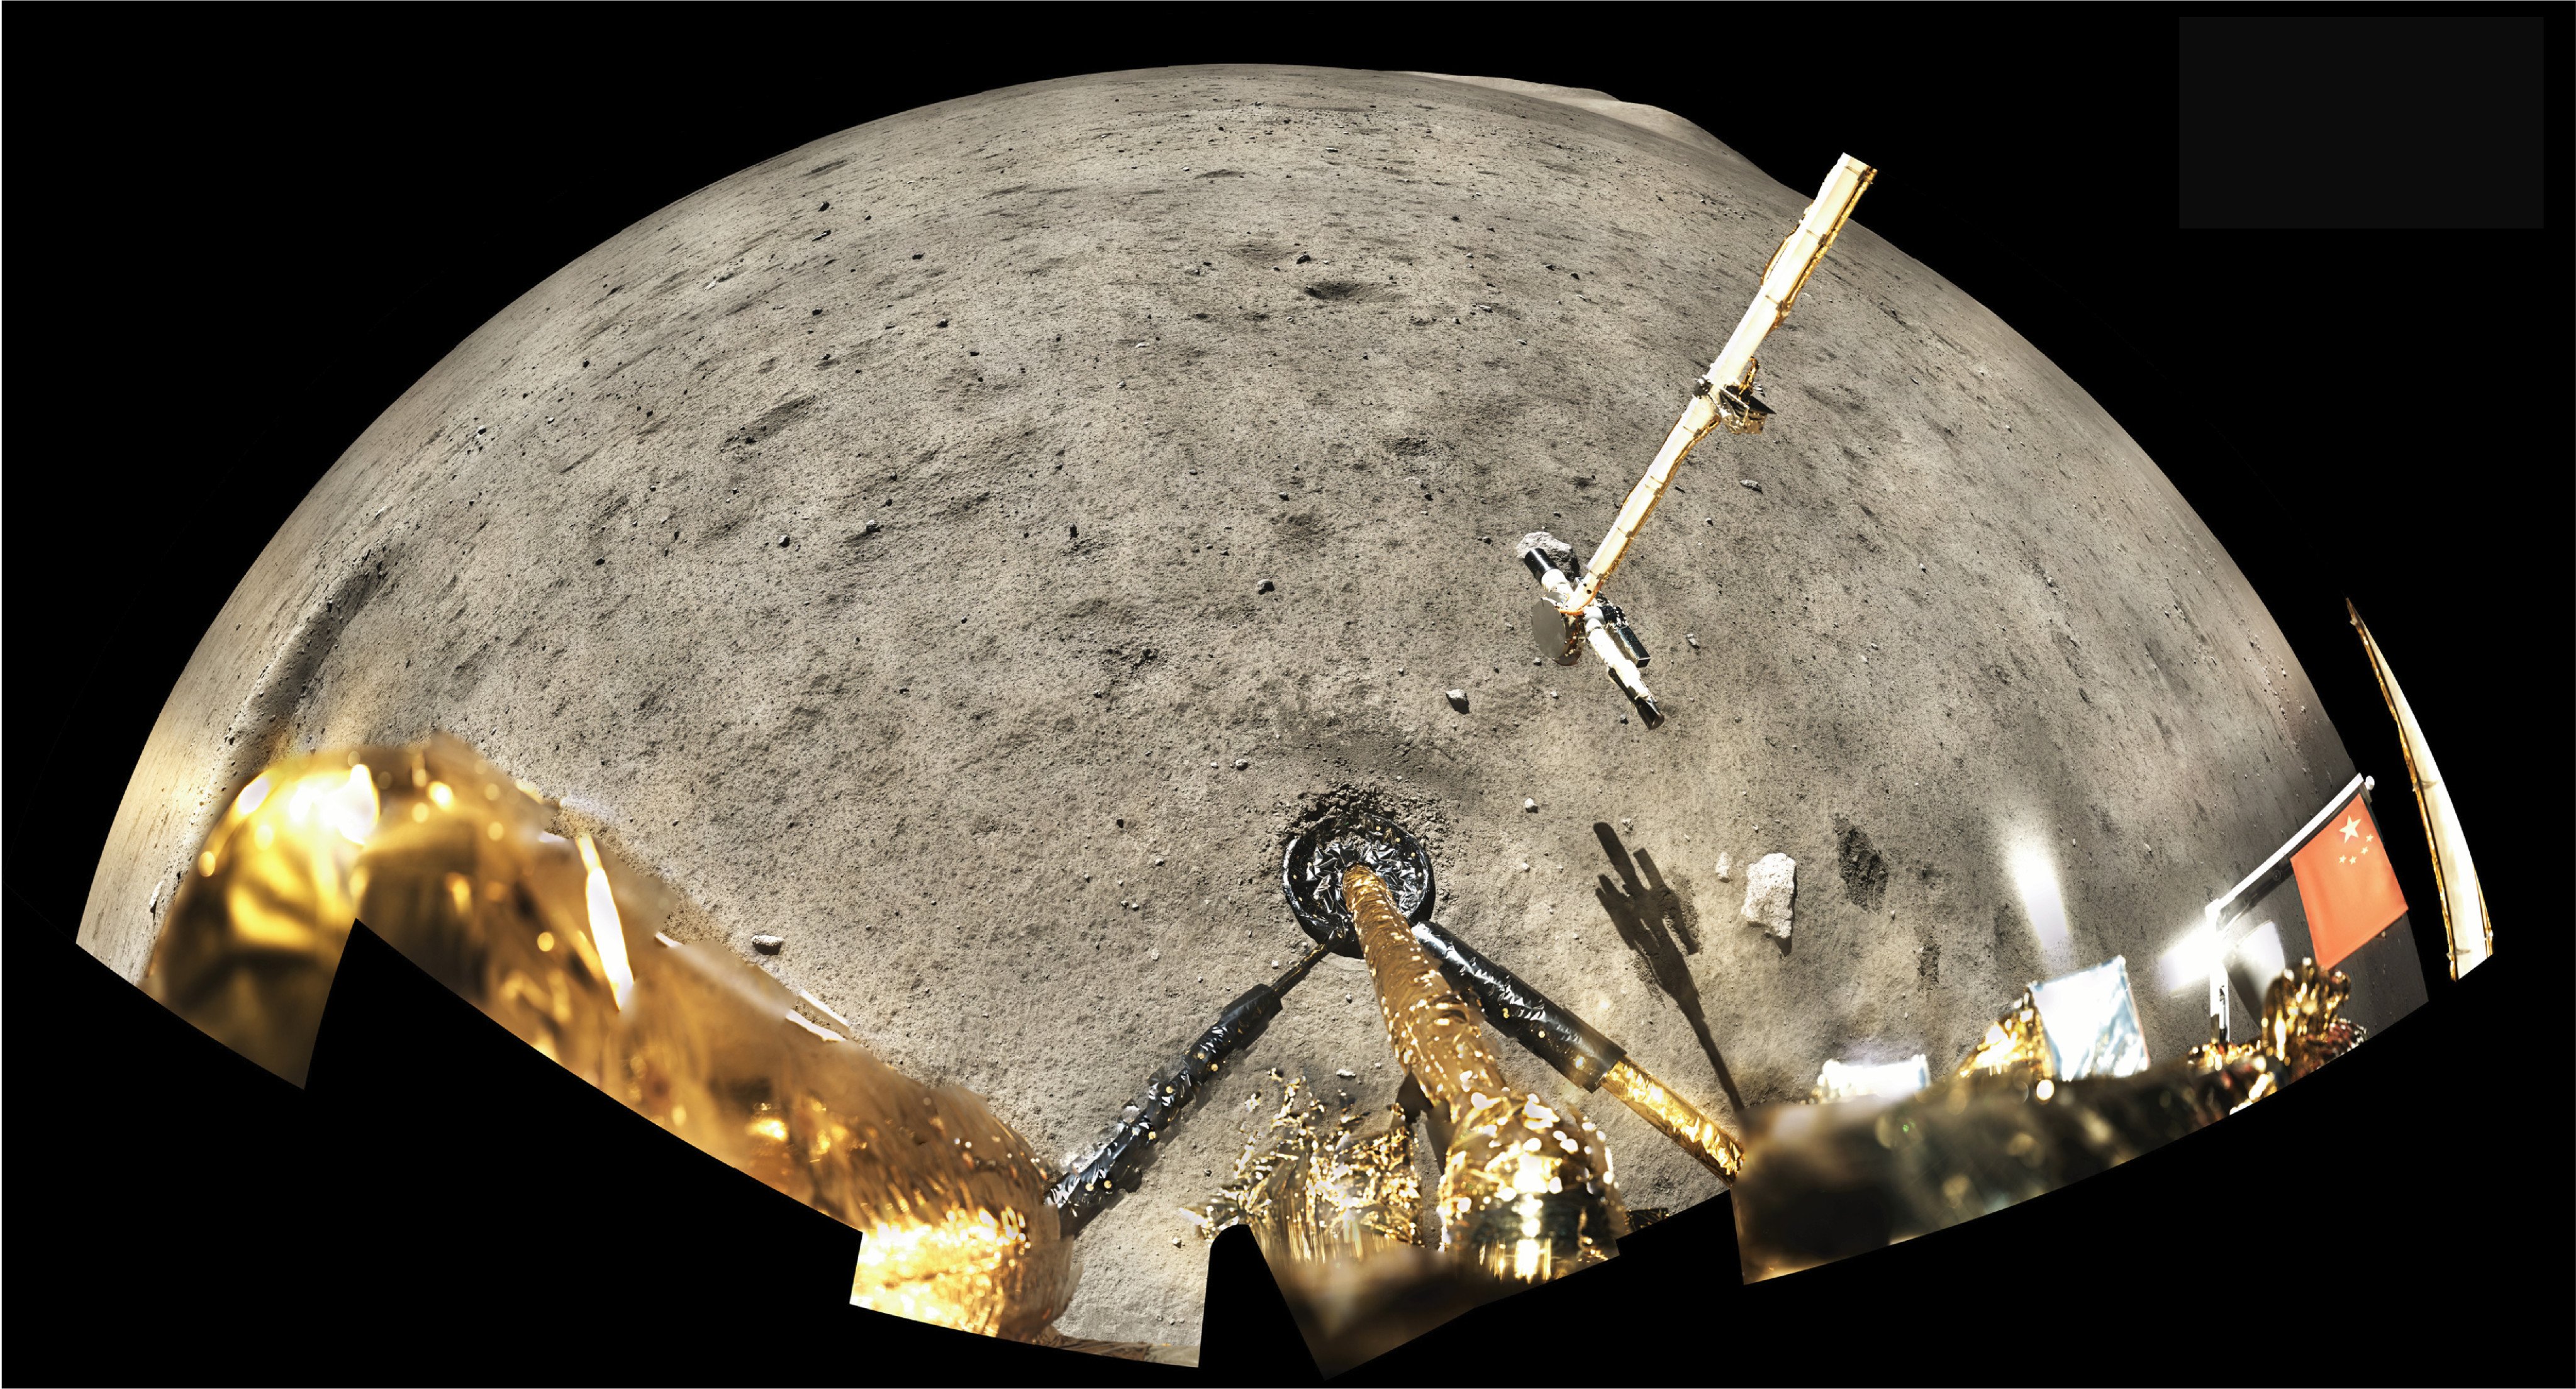 The minerals were probably formed as a result of intense vaporisation and deposition triggered by the constant, powerful bombardment of micrometeorites from space, the team says in Nature Astronomy. Photo: Chinese National Space Agency Lunar Exploration and Space Engineering Center